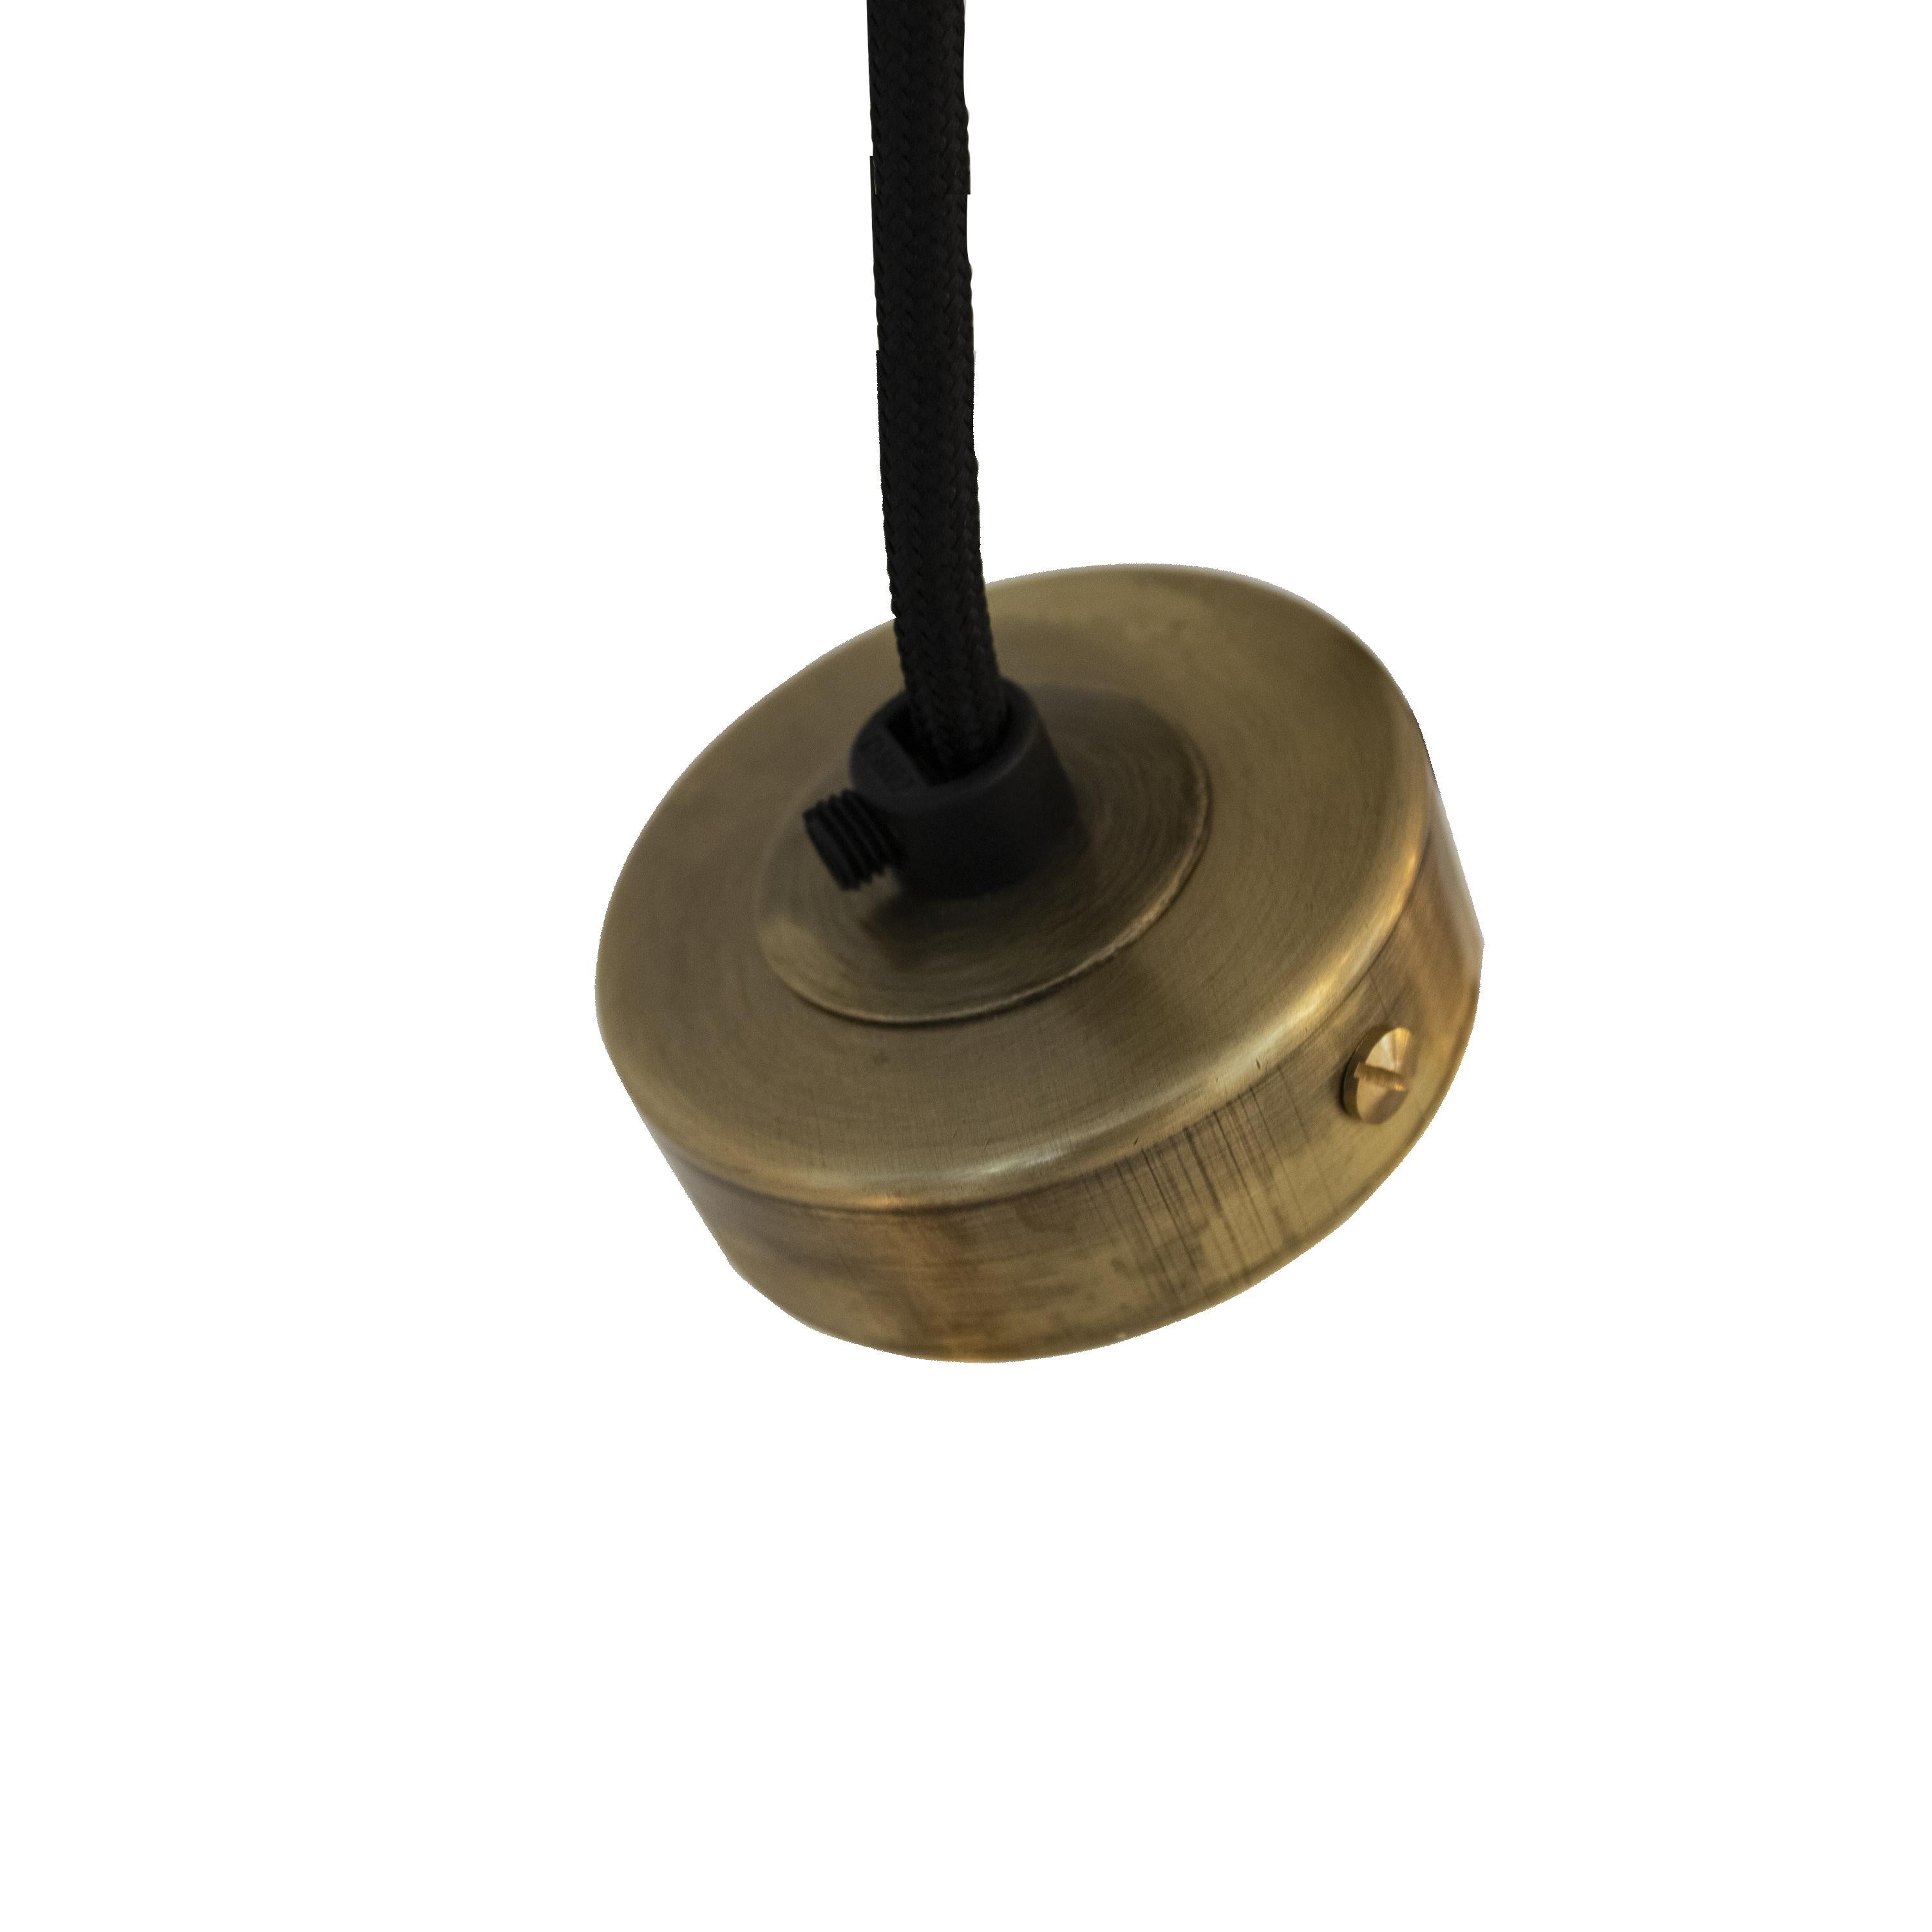 Brass Contemporary Ovel Pandent Light, Designed by IKB191, Spain, 2022 For Sale